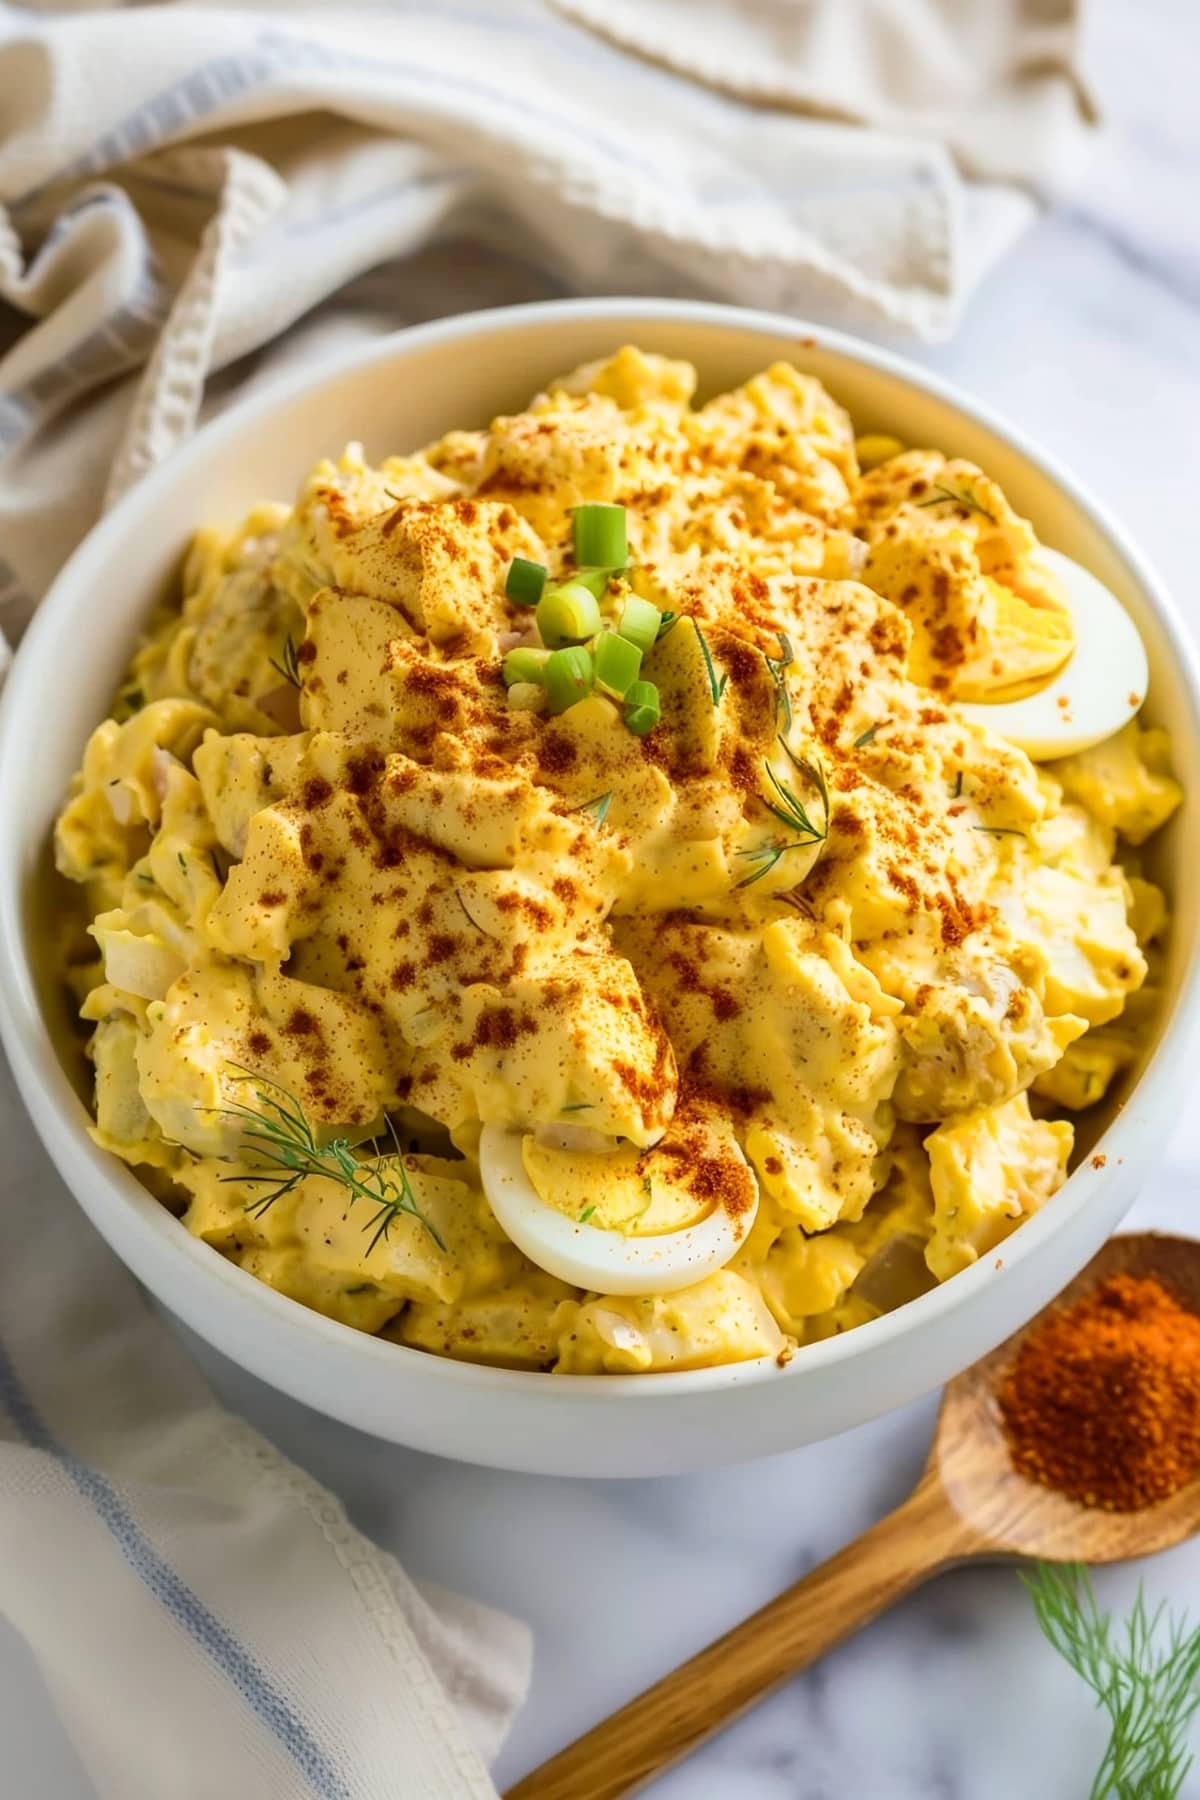 Flavorful potato salad with a deviled egg twist, topped with chopped green onions and dill, perfect for picnics and potlucks